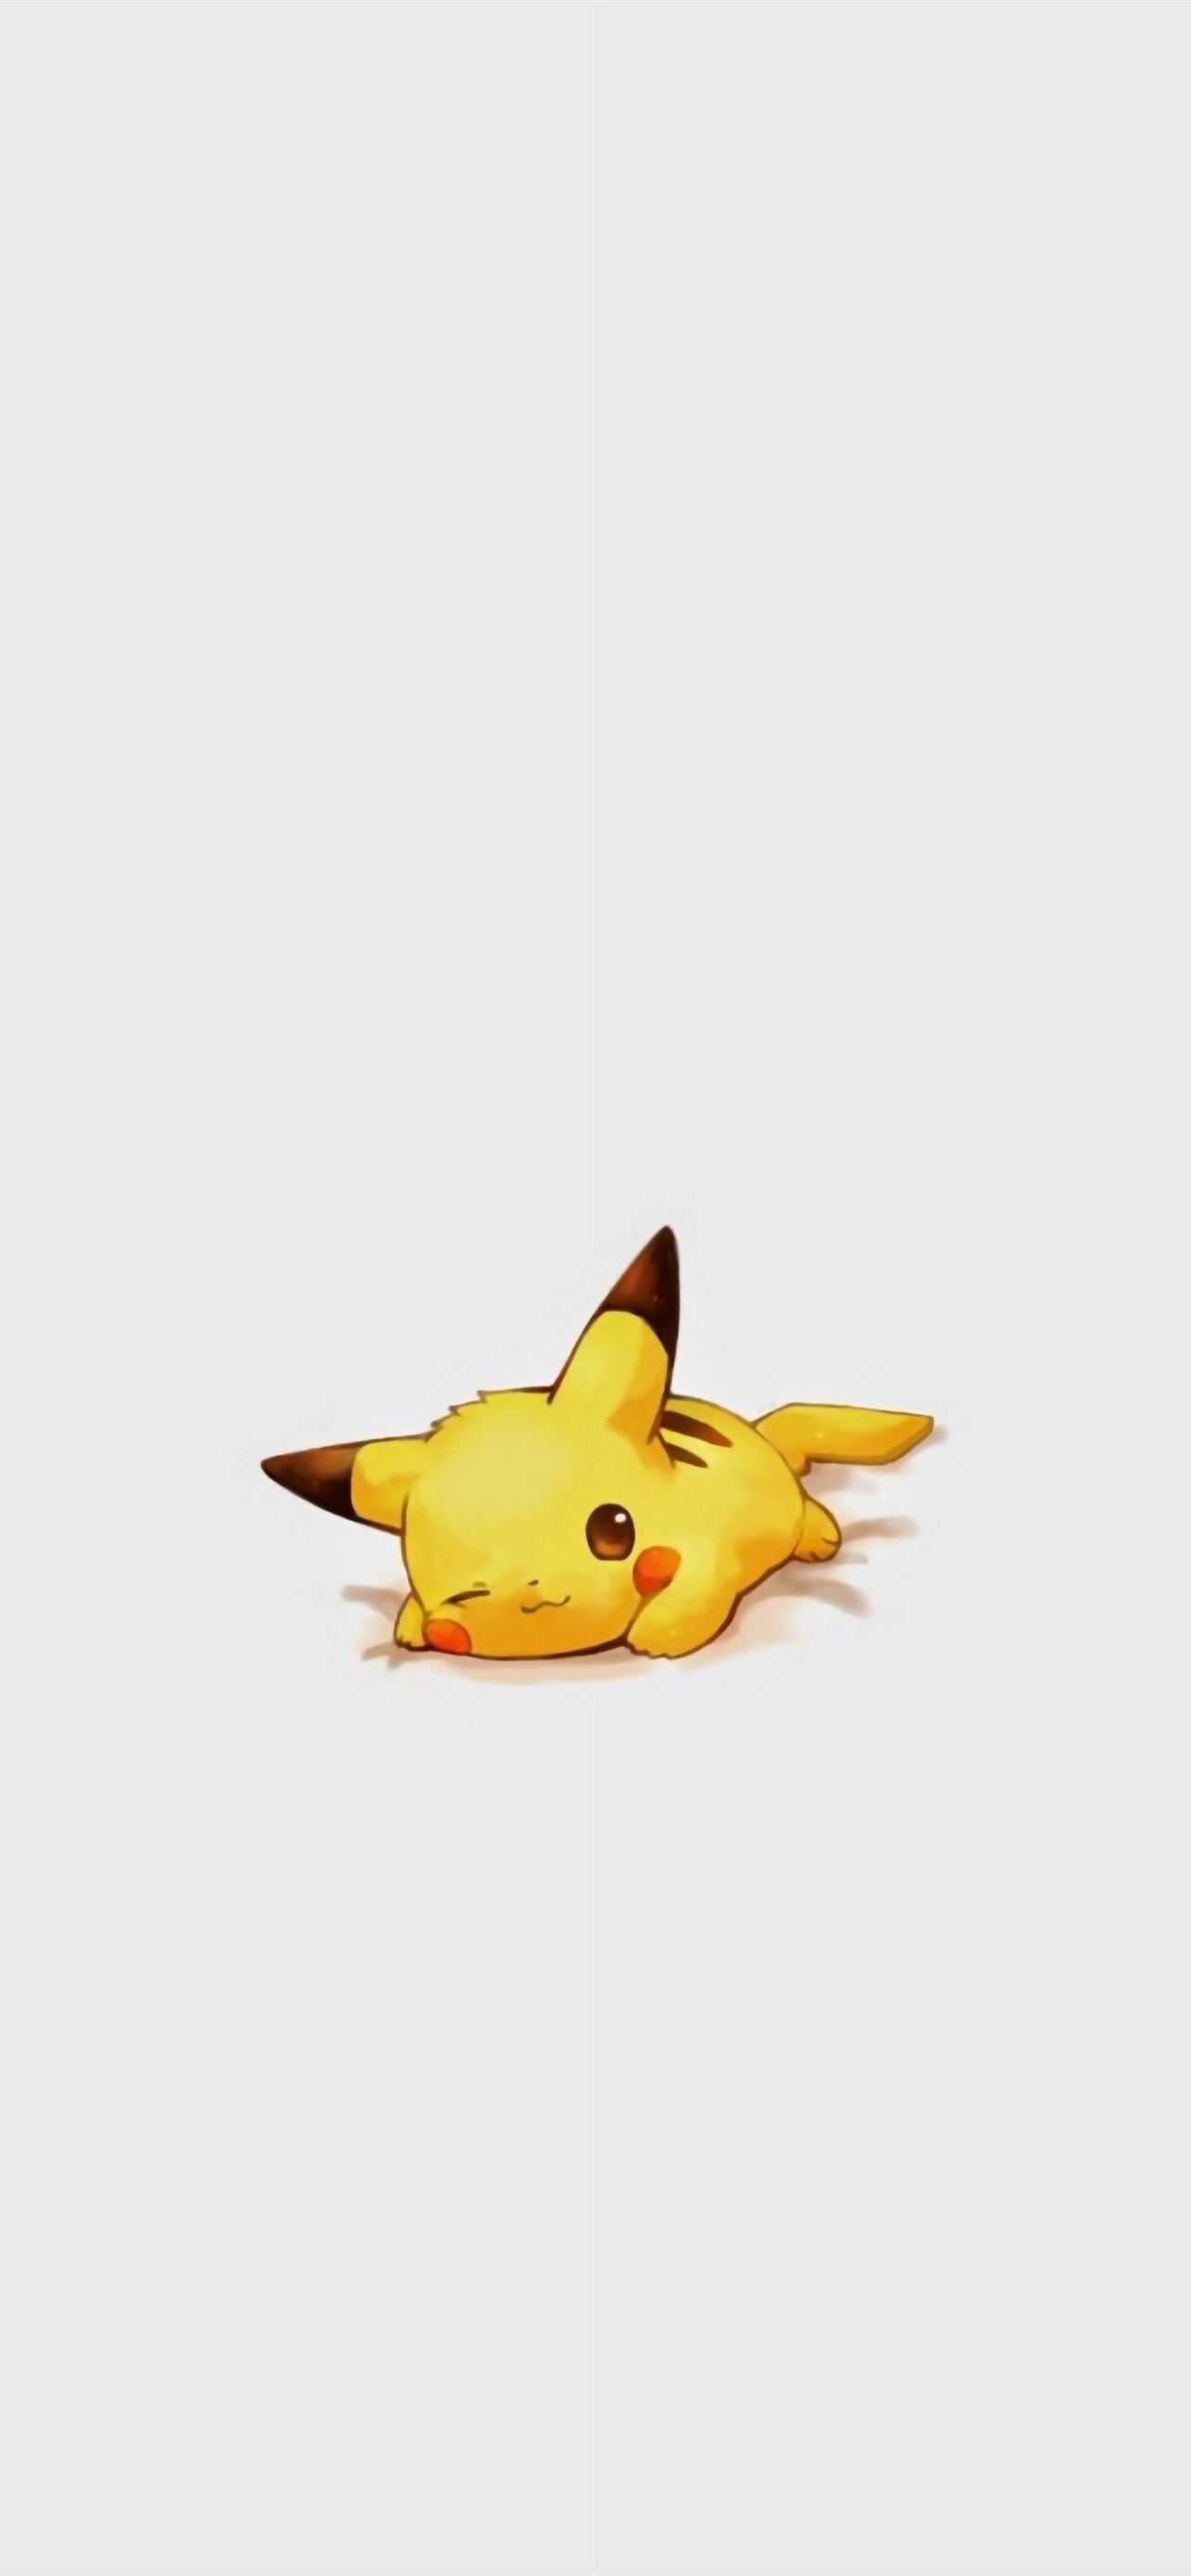 1284x2778 Cute Pikachu Pokemon Character iPhone Wallpapers Free Download